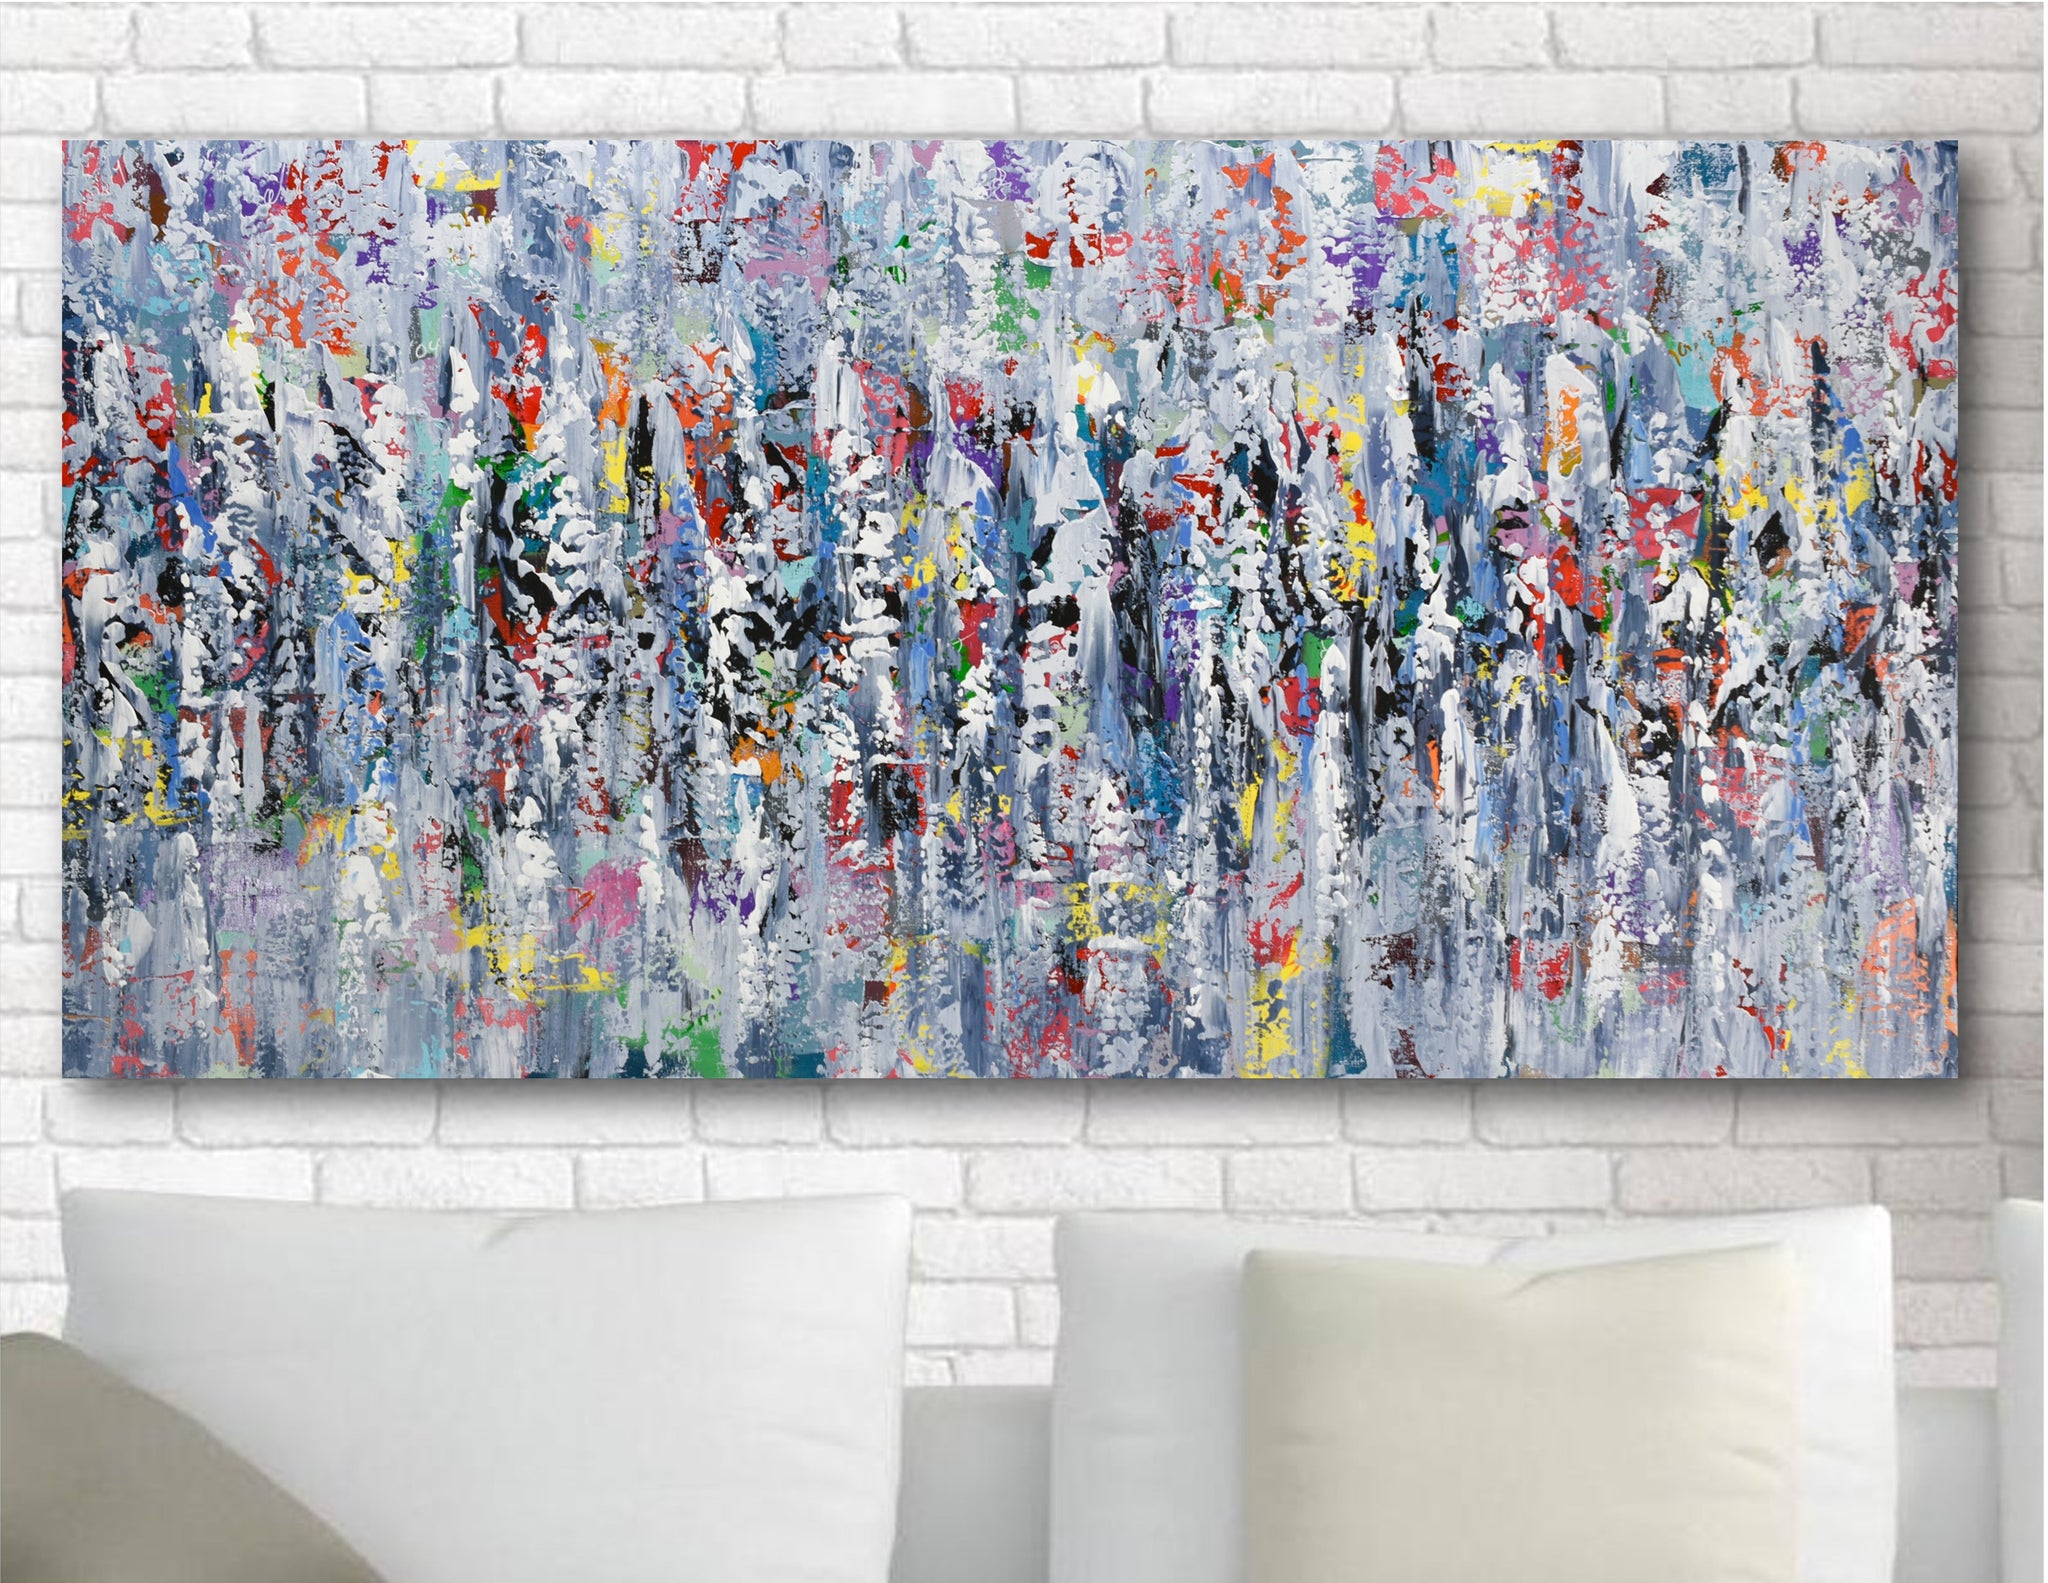 Colors of Joy, Abstract Colorful Painting on Canvas, Acrylic, 24"x48"